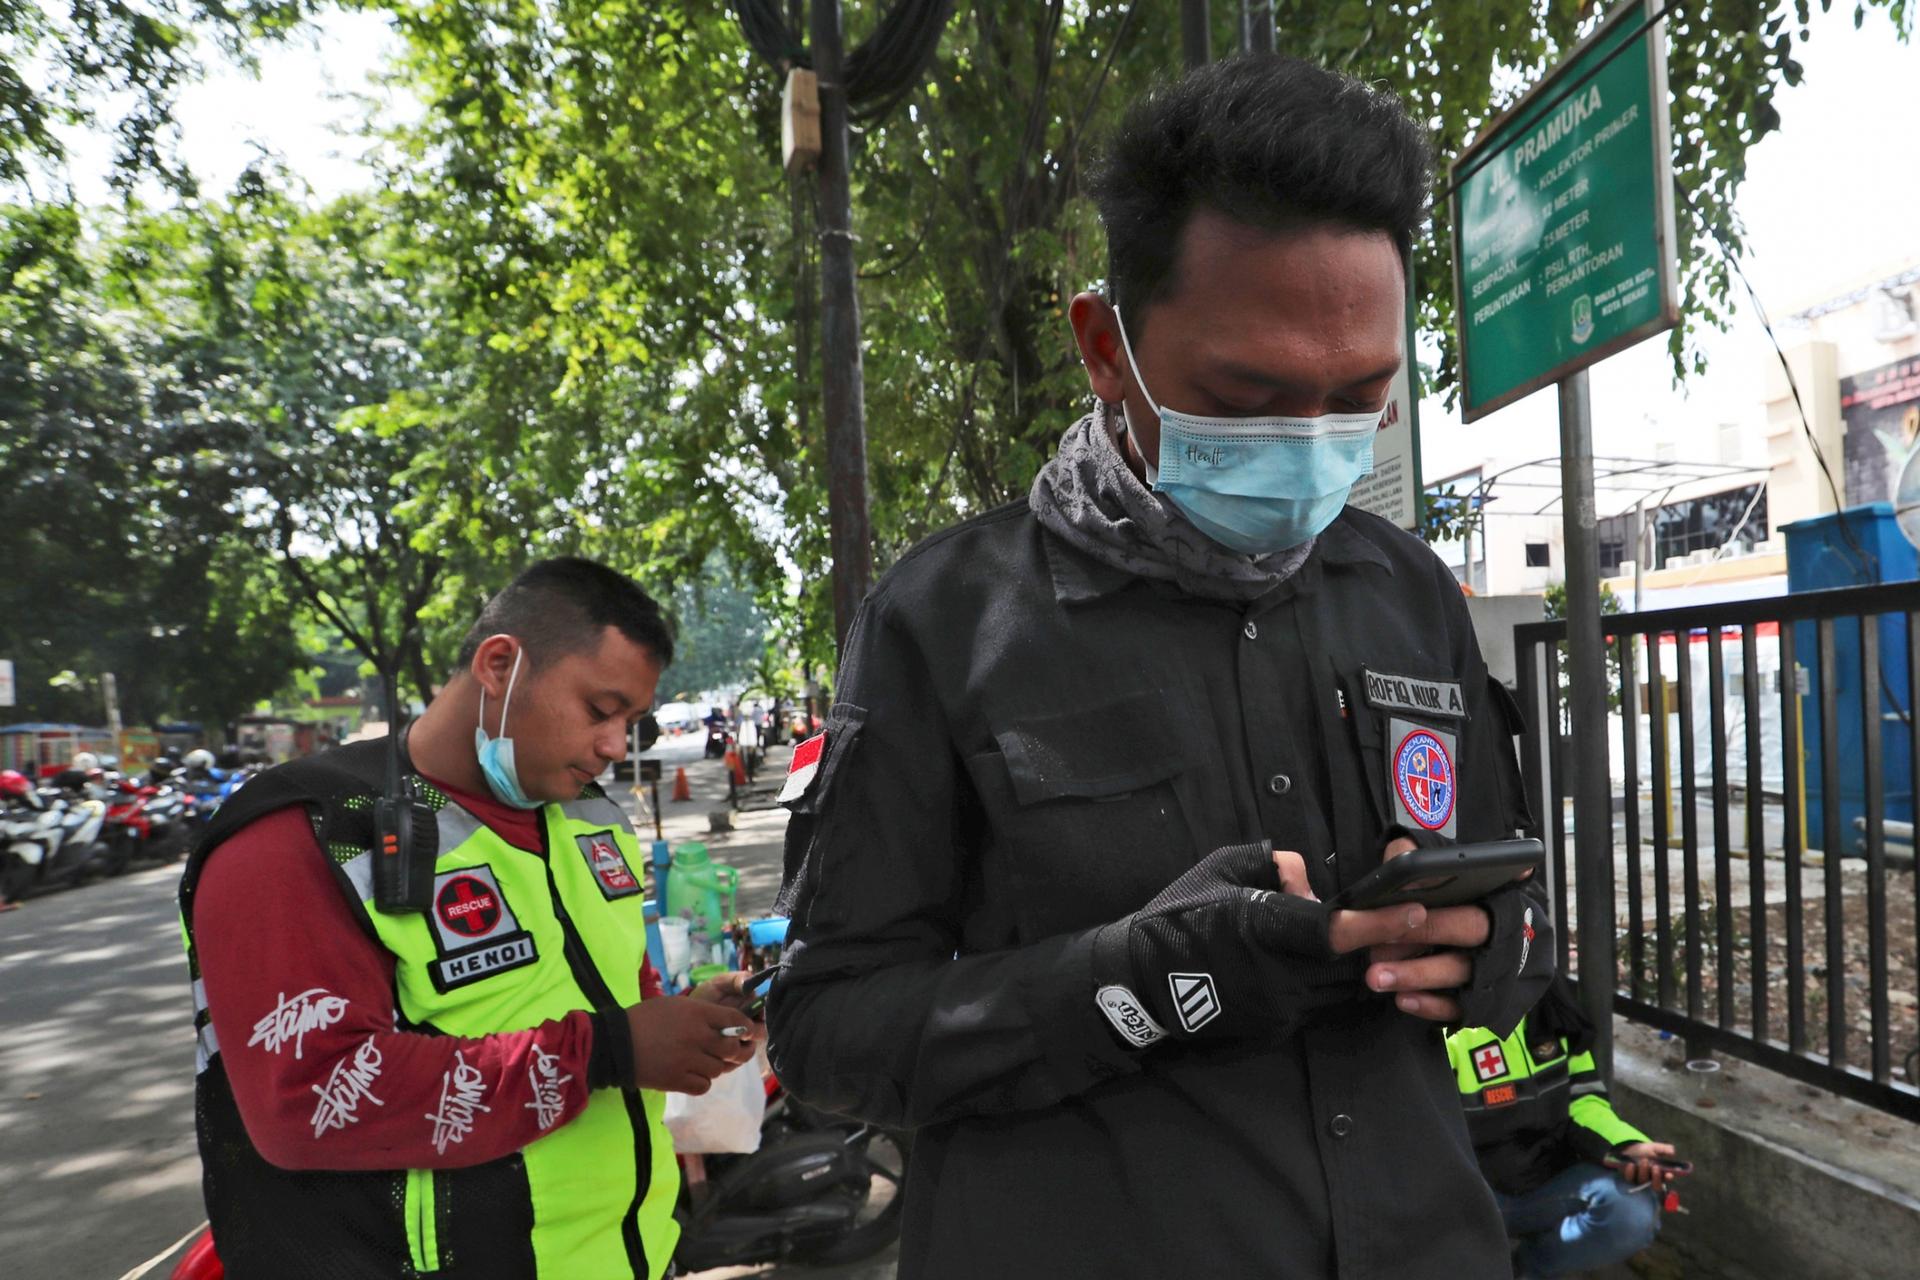 Two men are shown looking down at their mobile phones while wearing medical face masks.